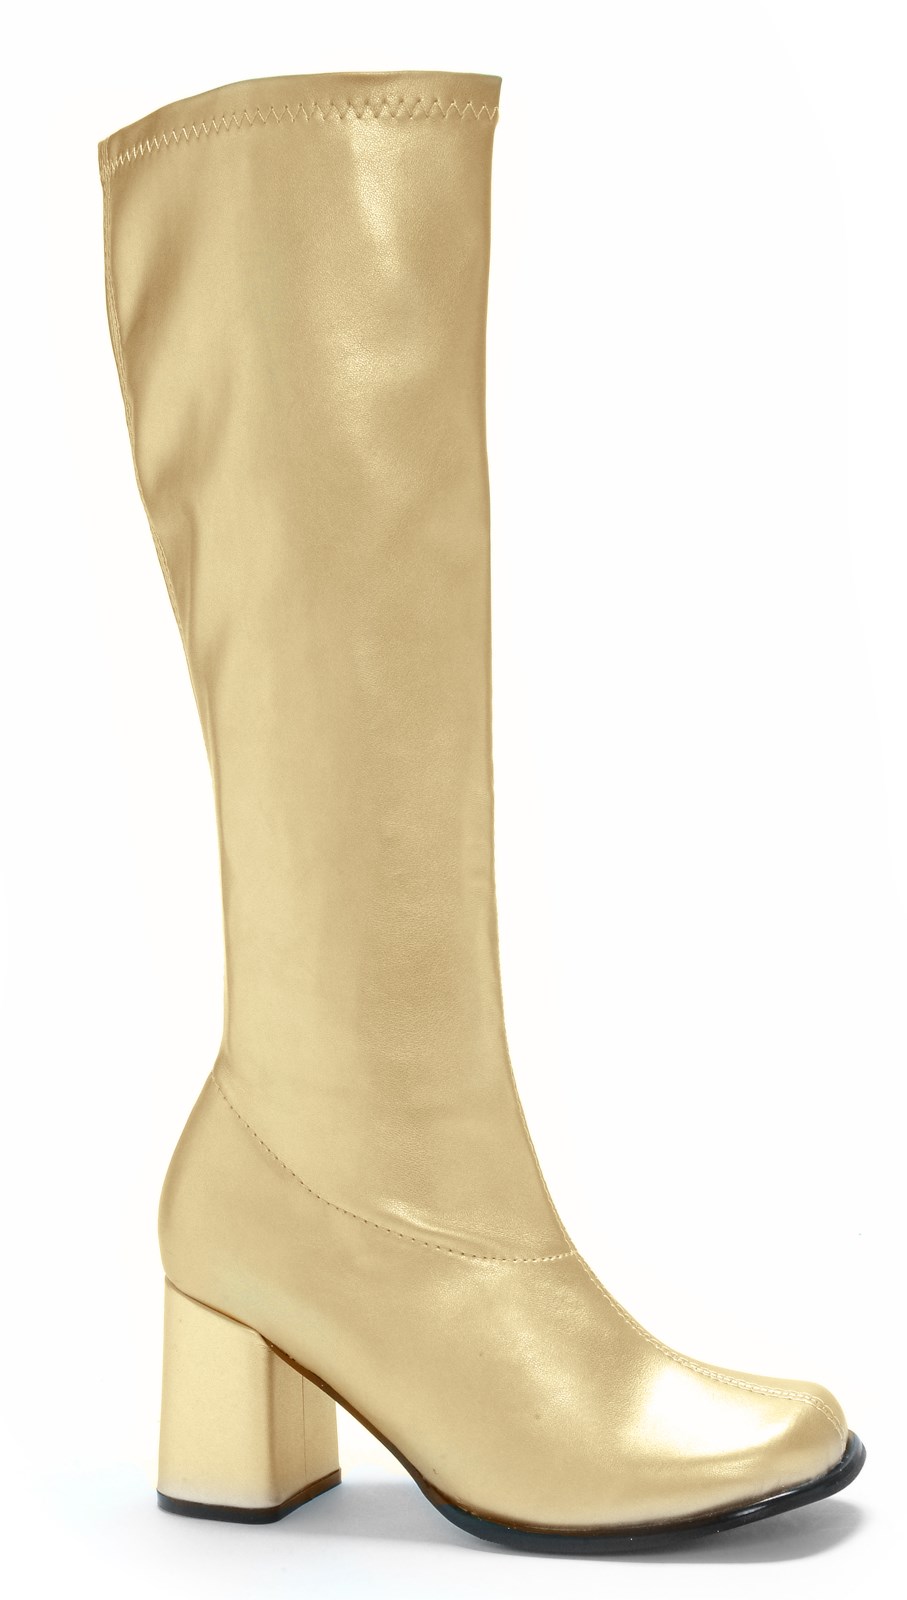 Gogo (Gold) Adult Boots